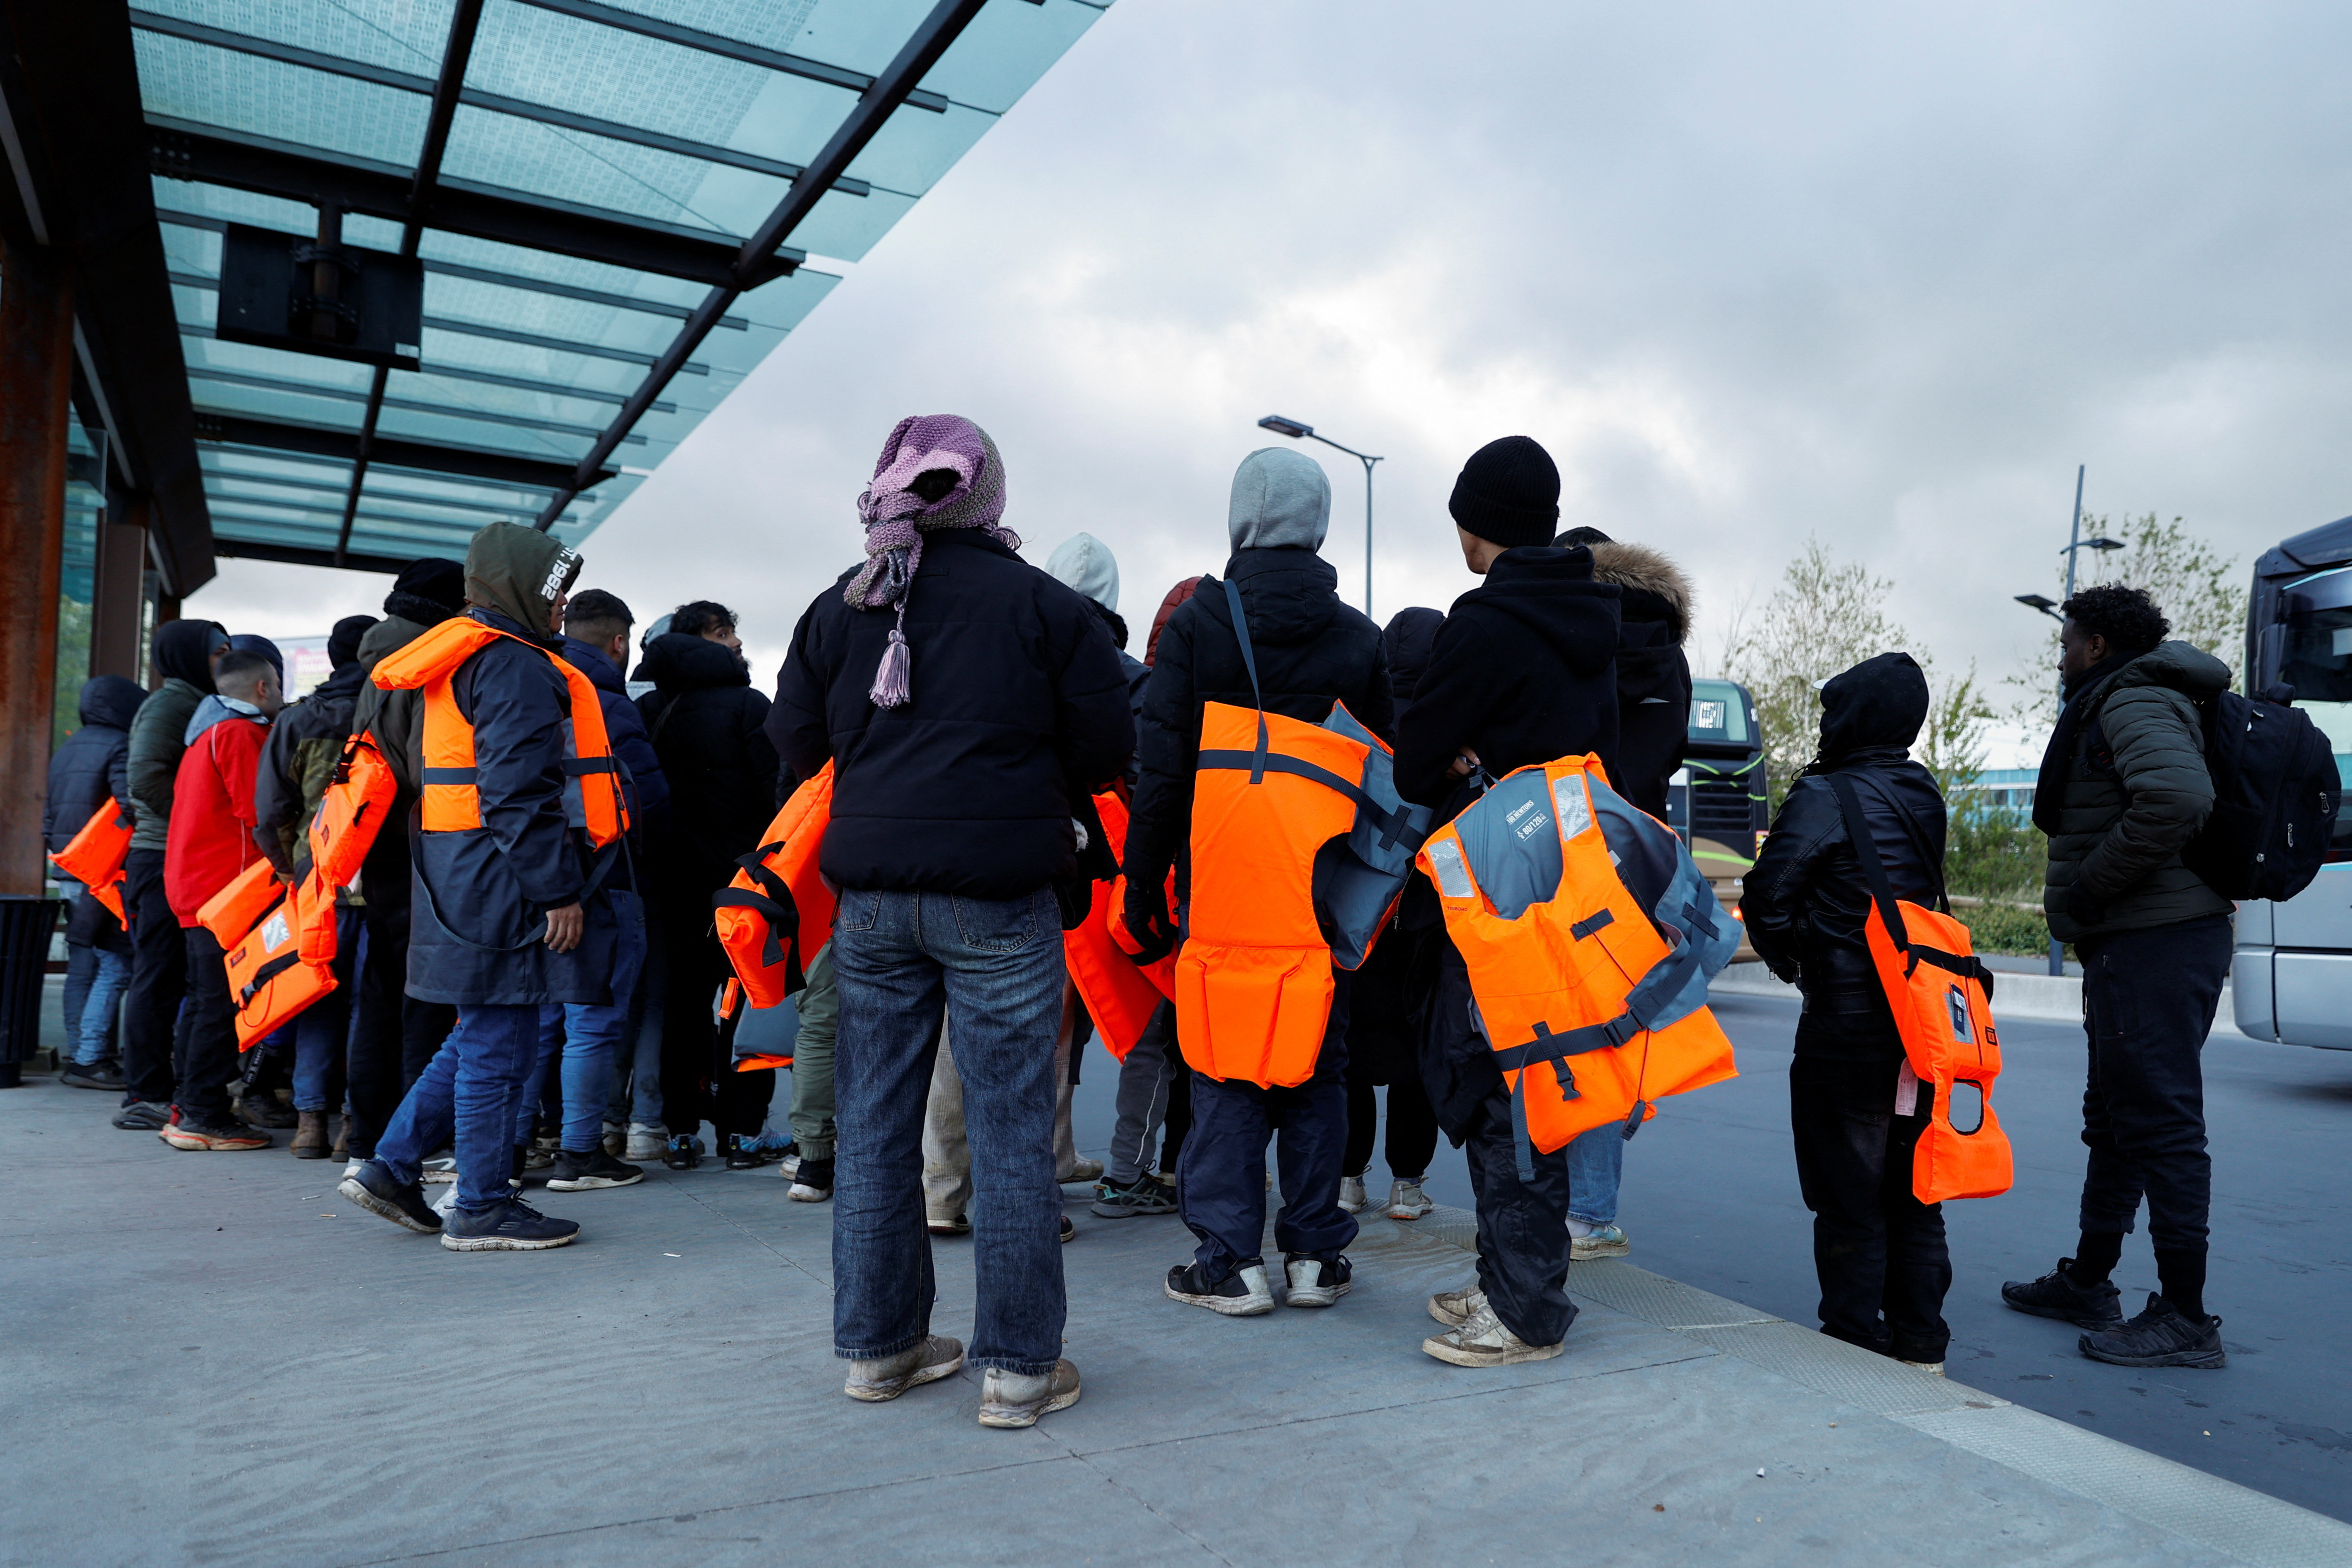 Migrants wait for a bus to return from the beach to their camp, at Calais train station